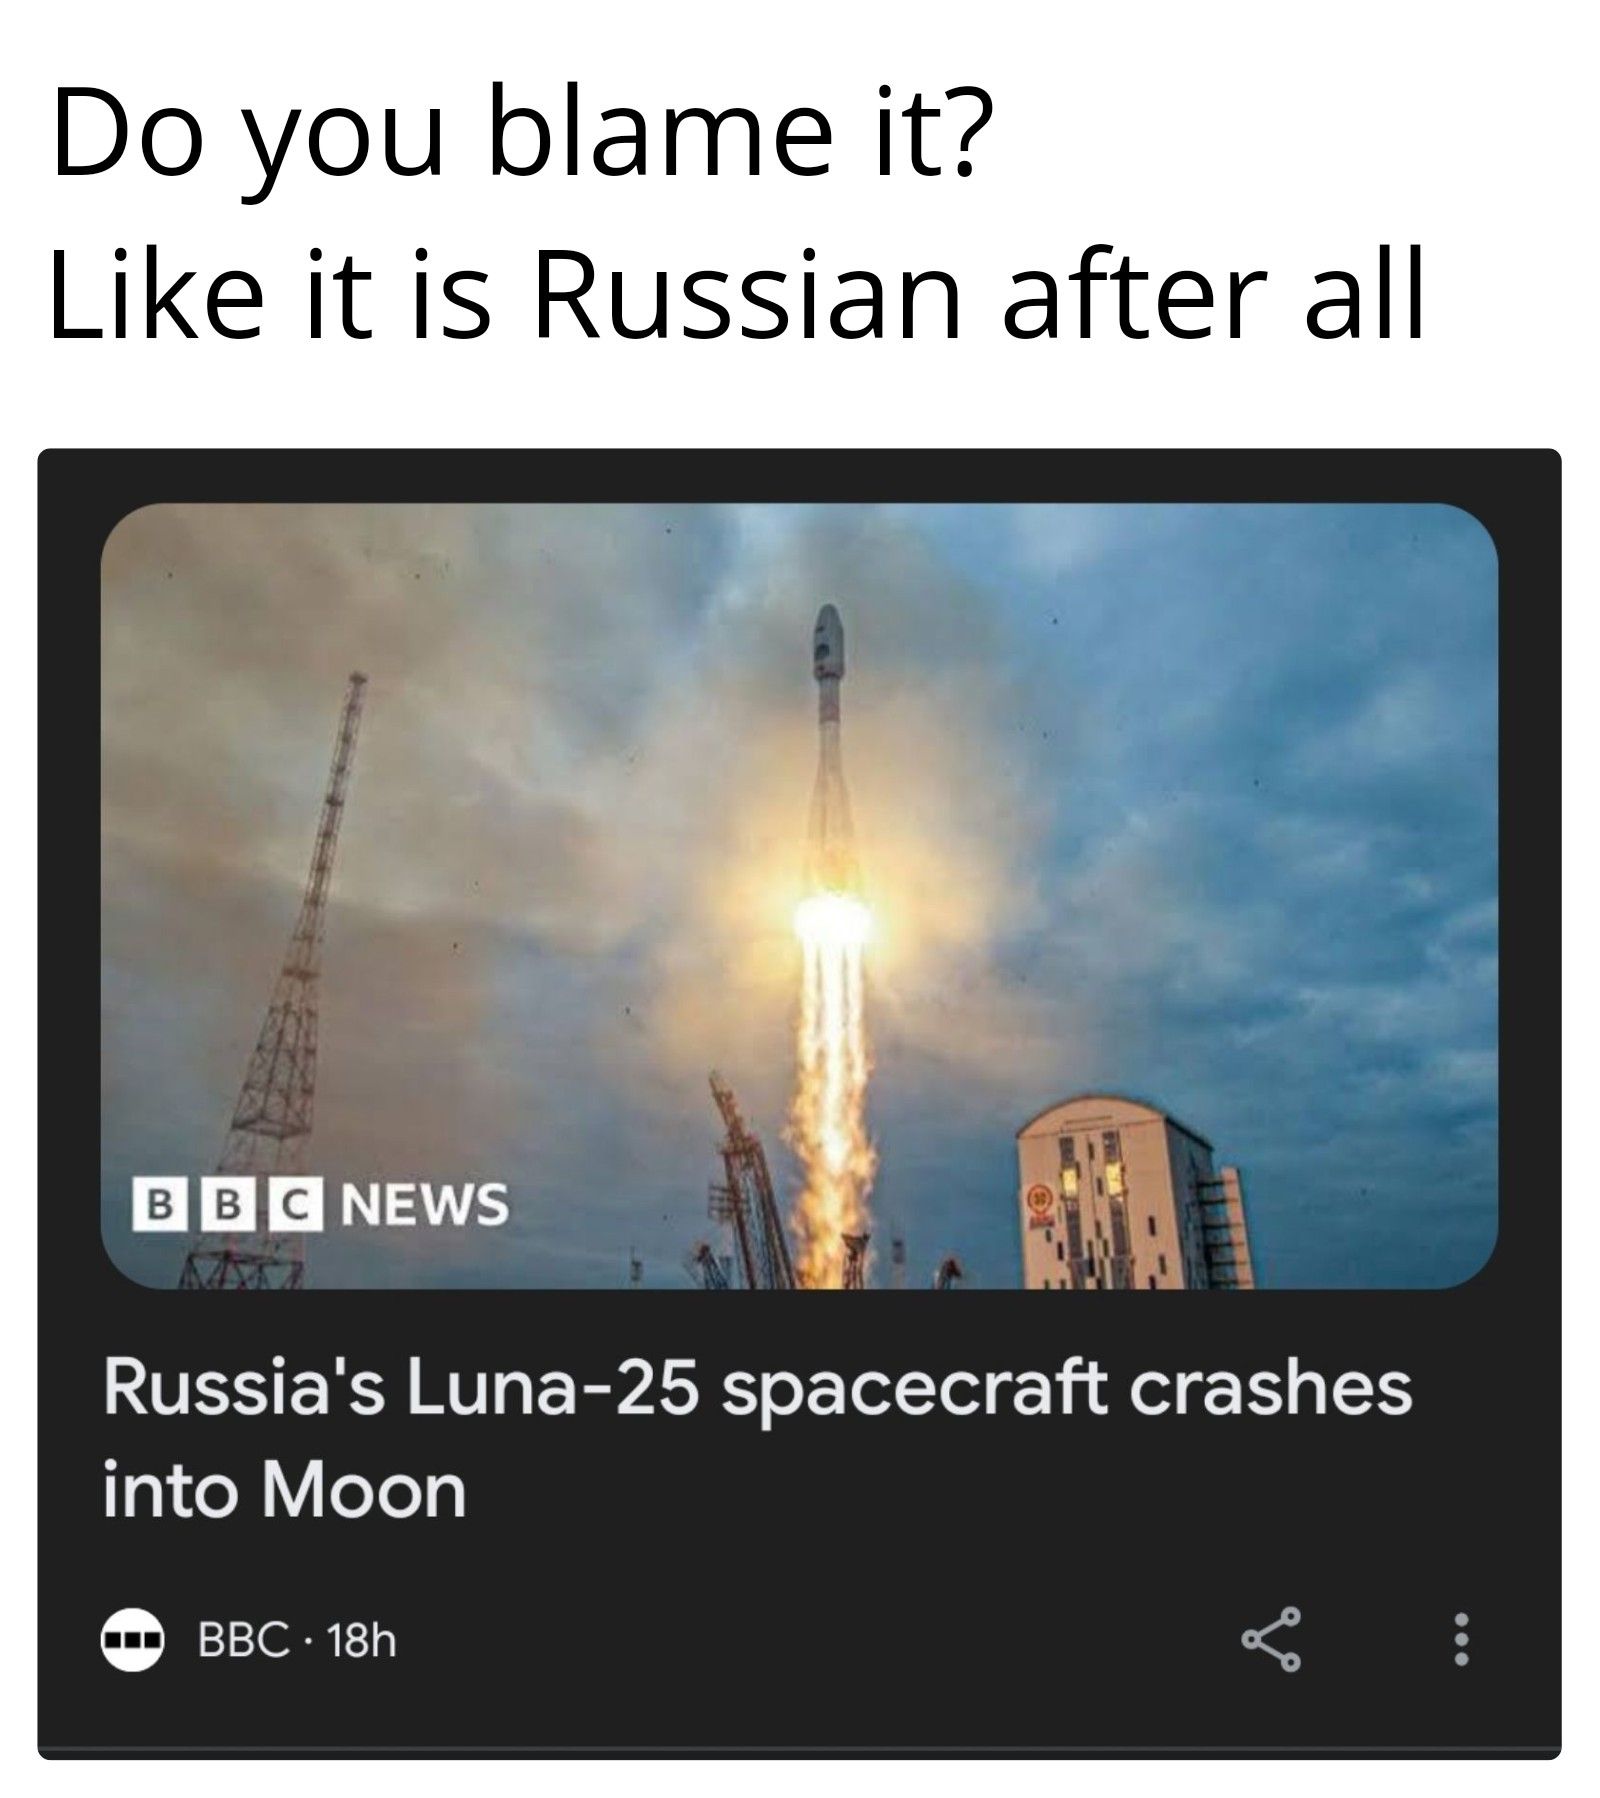 Do you blame it?
Like it is Russian after all
BBC NEWS
Russia's Luna-25 spacecraft crashes
into Moon
BBC - 18h
go